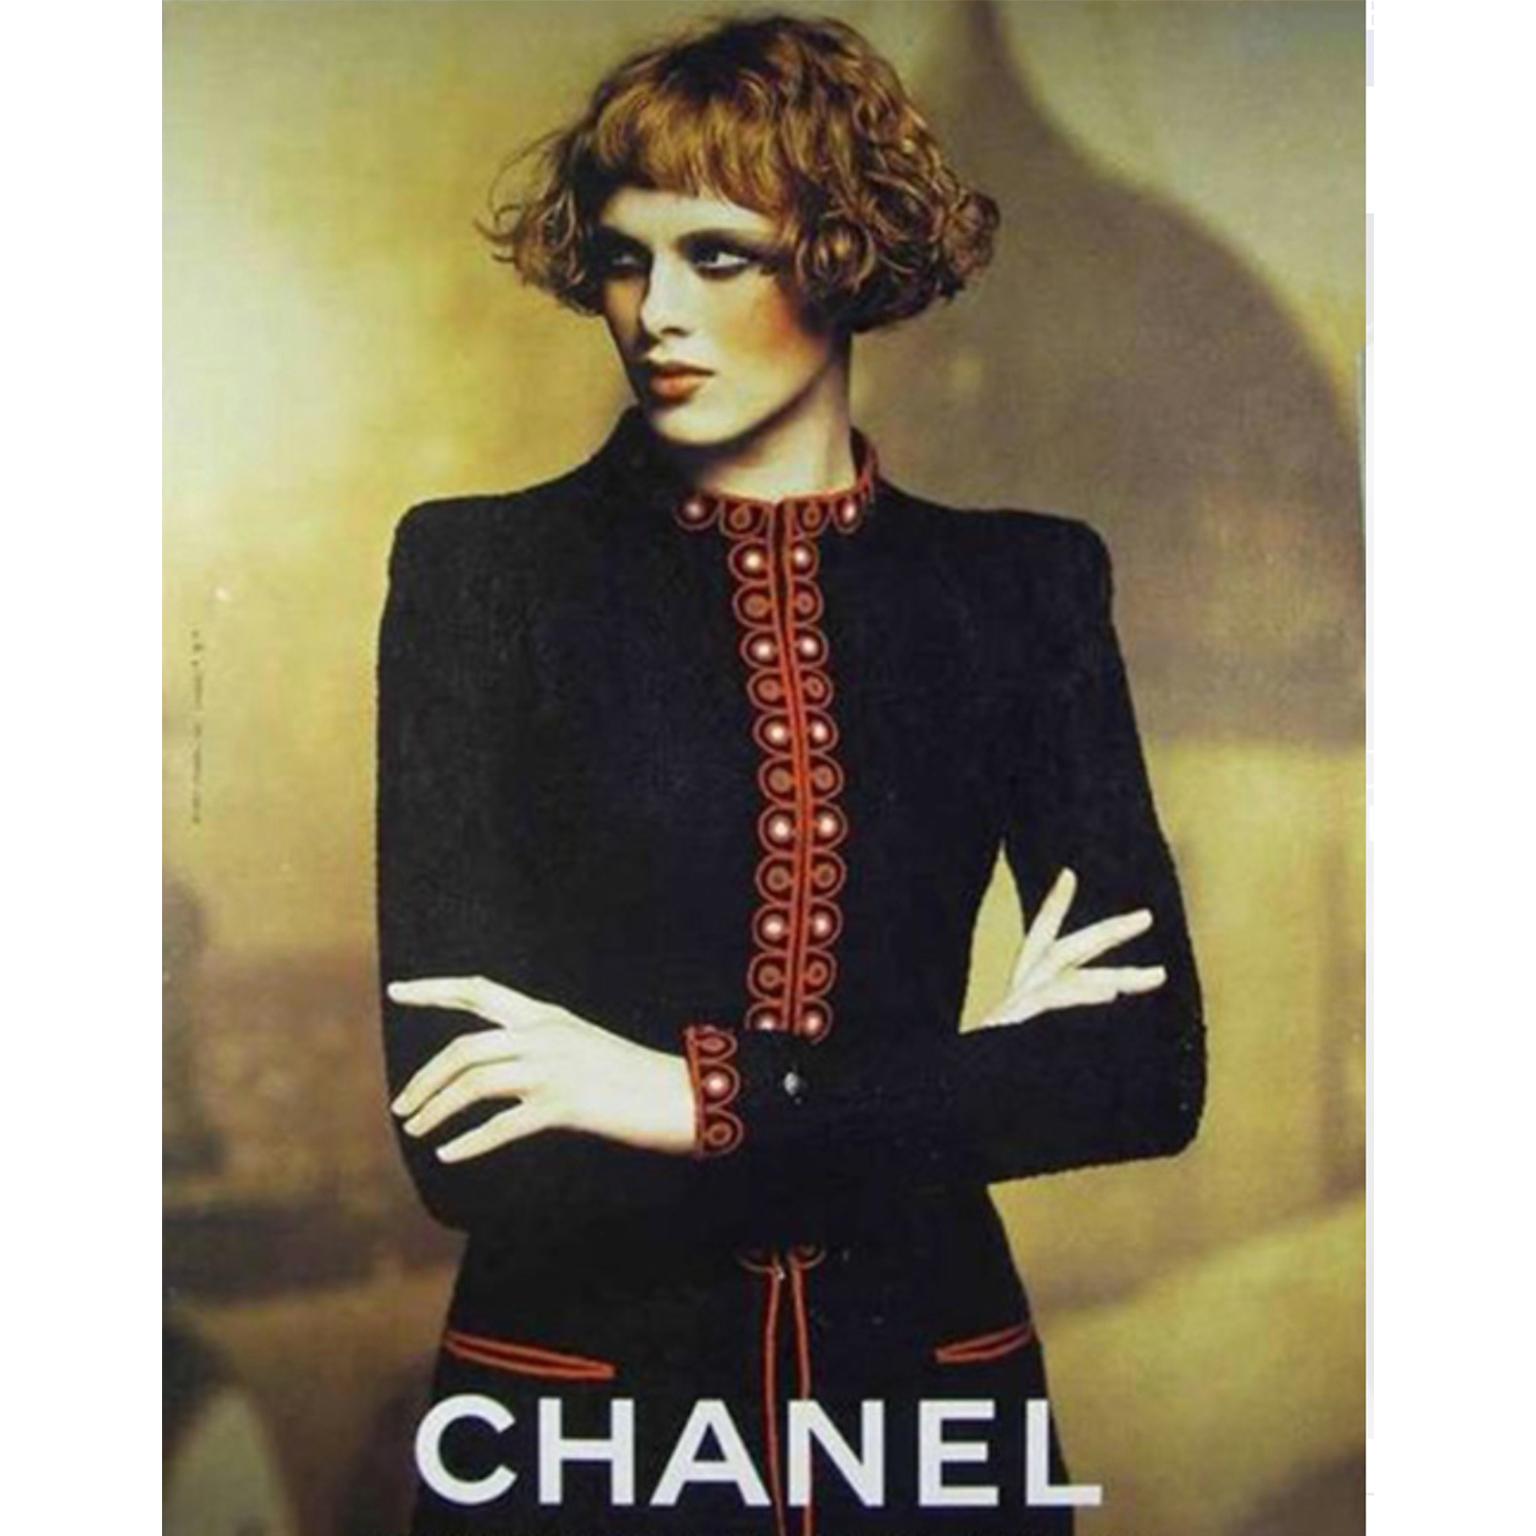 We are obsessed with this vintage 1997 Chanel navy bouclé wool blend jacket with red embroidered trim and a matching pleated mini skirt. This iconic suit was designed by Karl Lagerfeld for the Fall Winter 1997 Chanel collection. If you don't wear